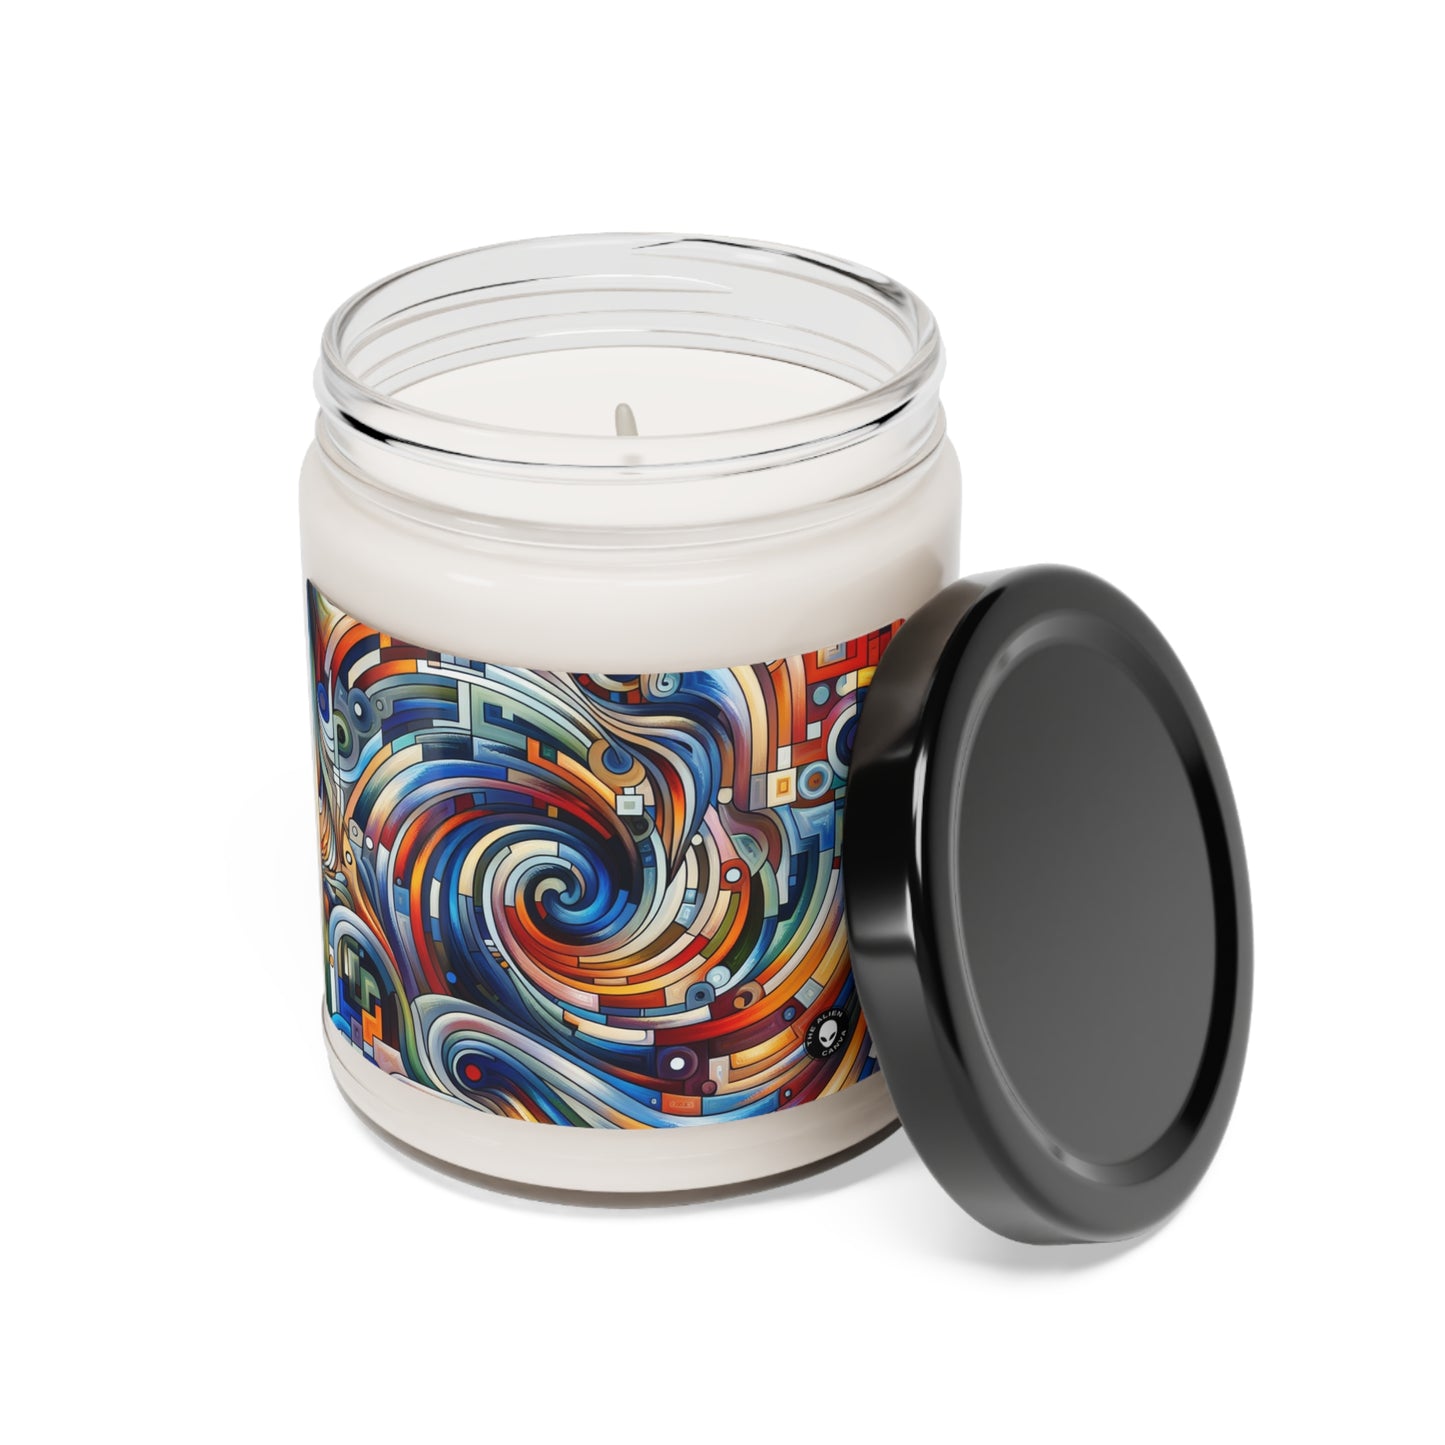 "Harmony in Motion: A Kinetic Exploration" - The Alien Scented Soy Candle 9oz Kinetic Art